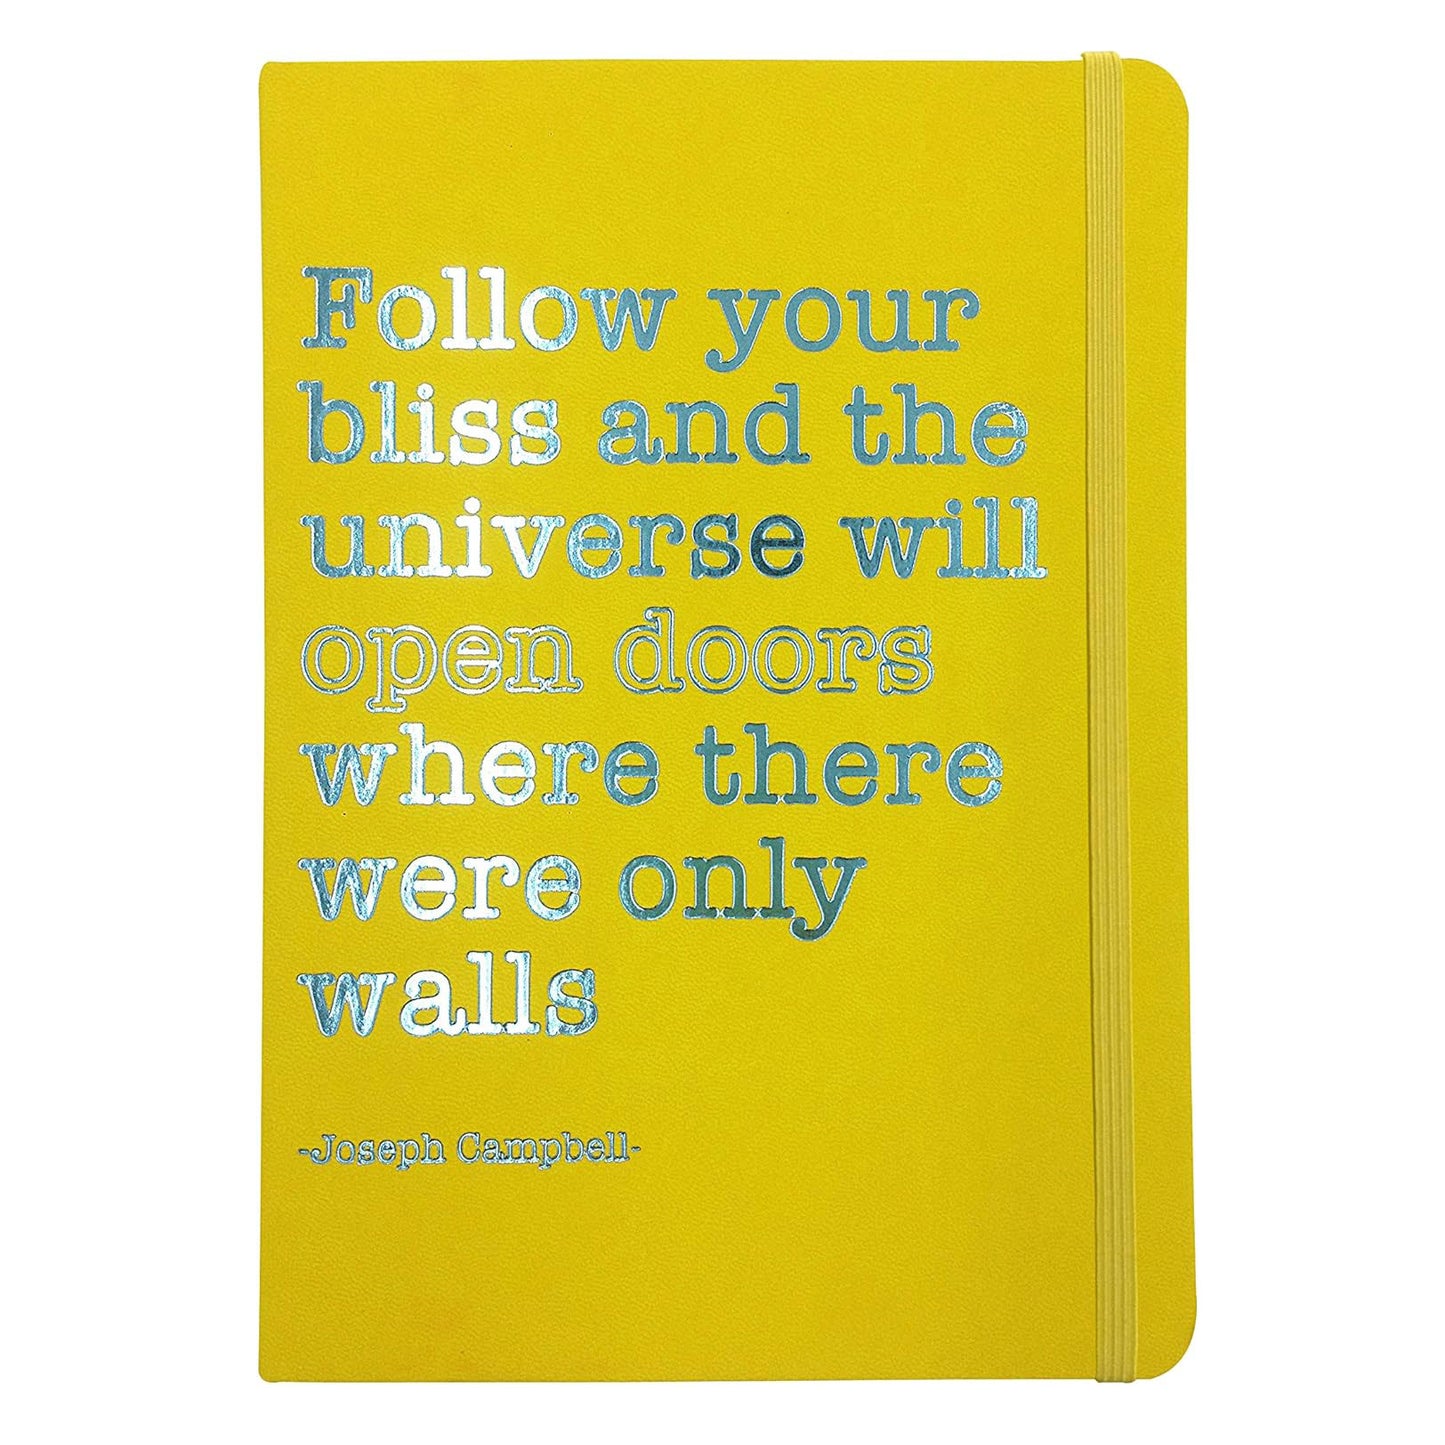 Joseph Campbell Quote Notebook - Follow your bliss and the universe will open doors...